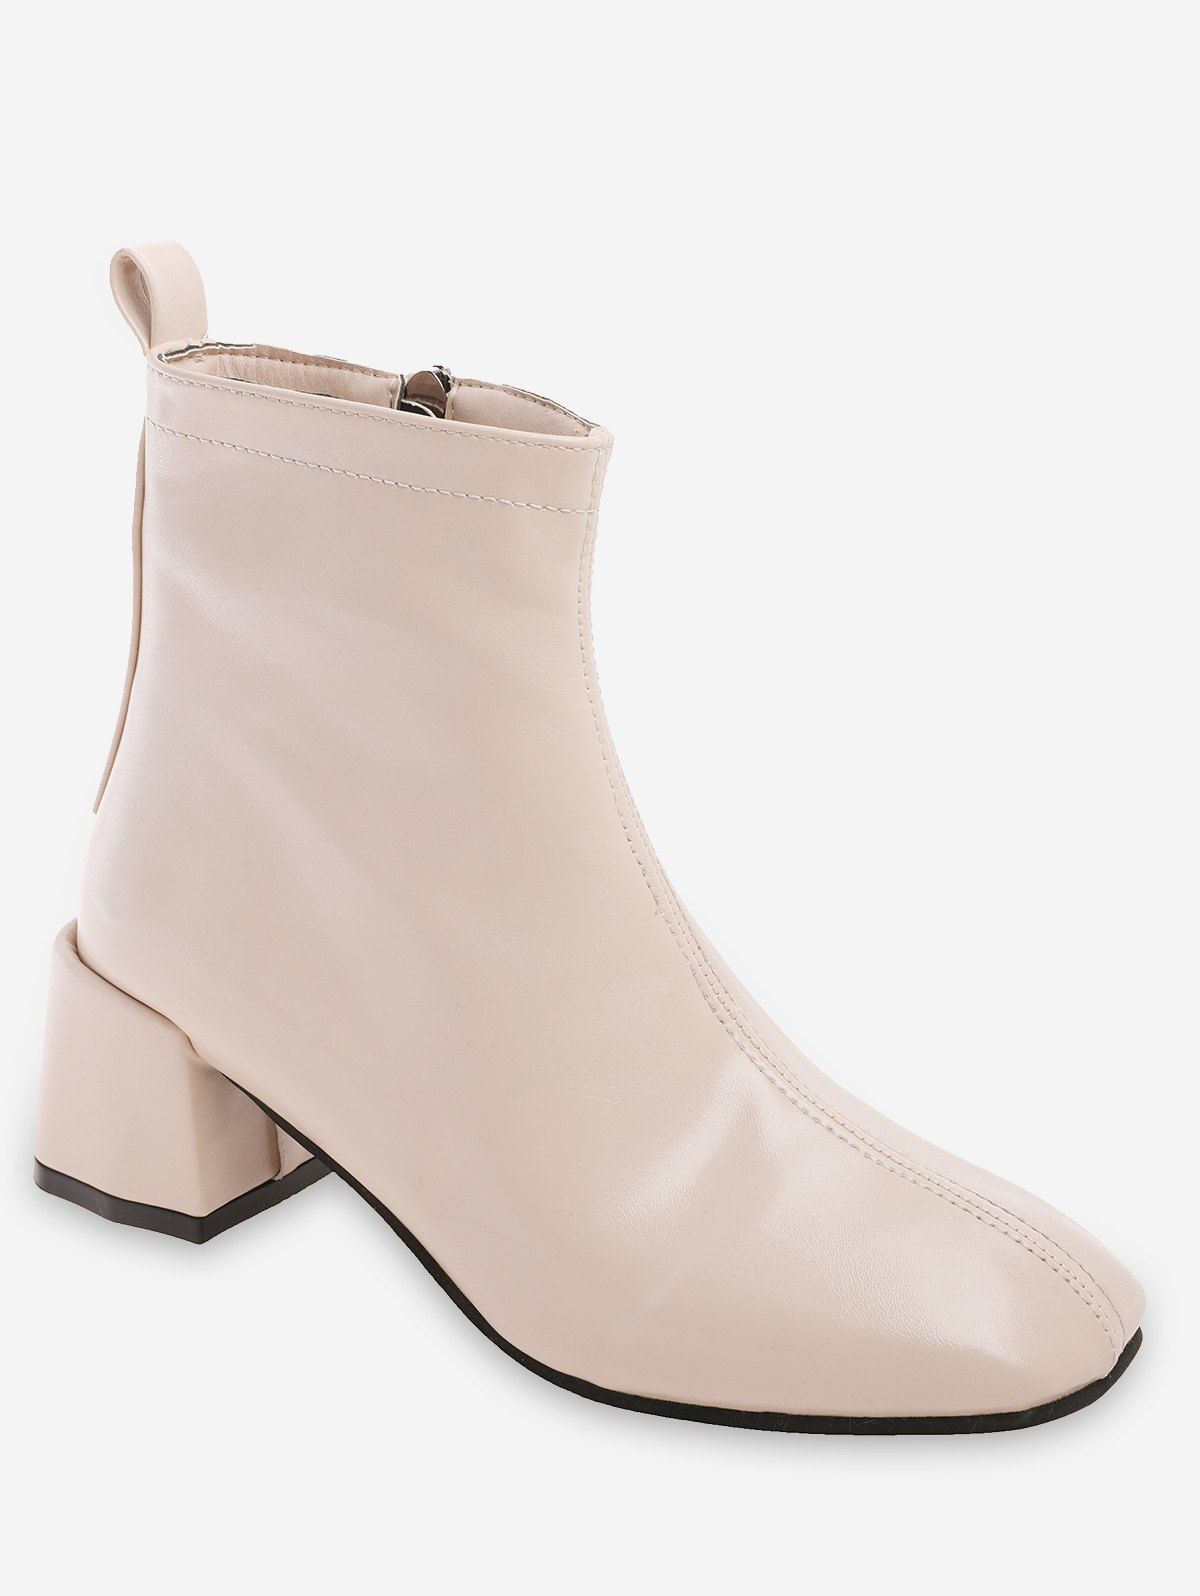 low heel square toe boots